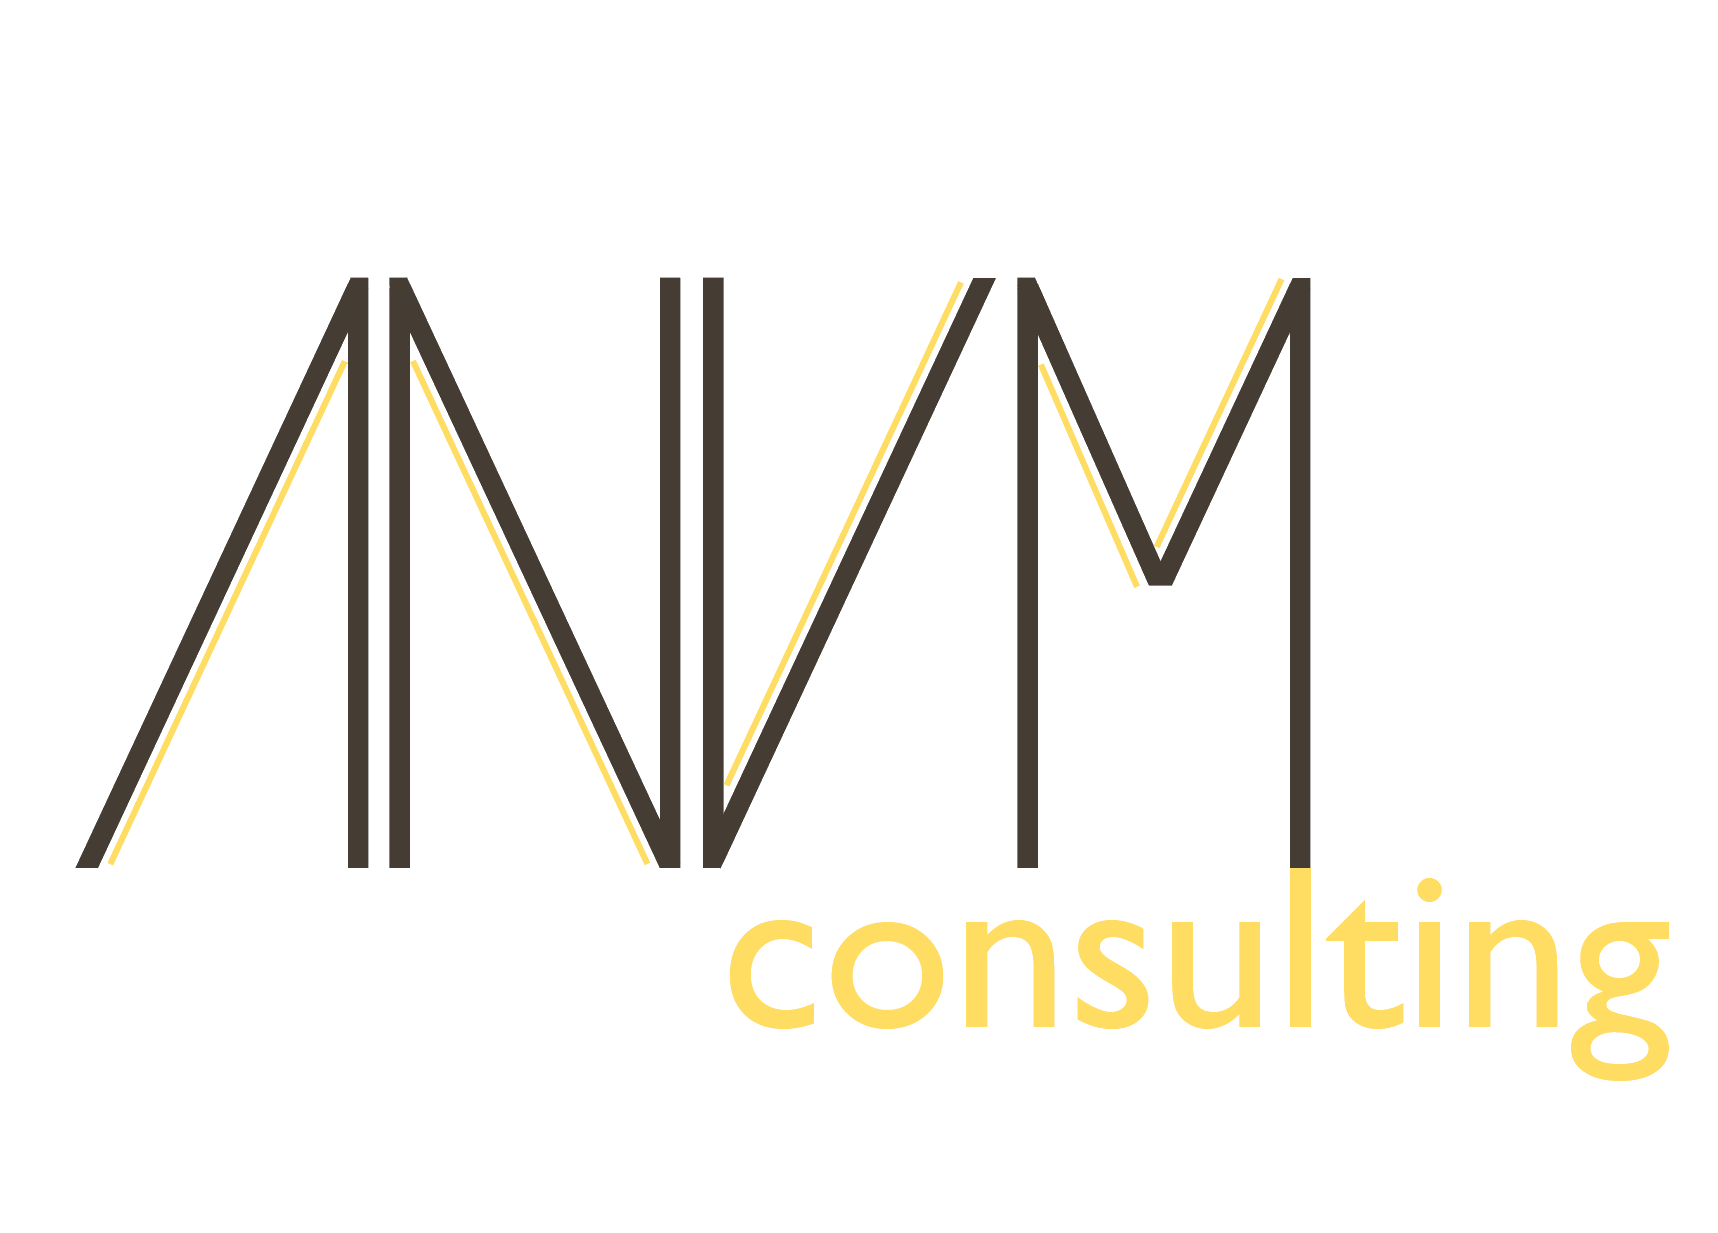 Anvm consulting